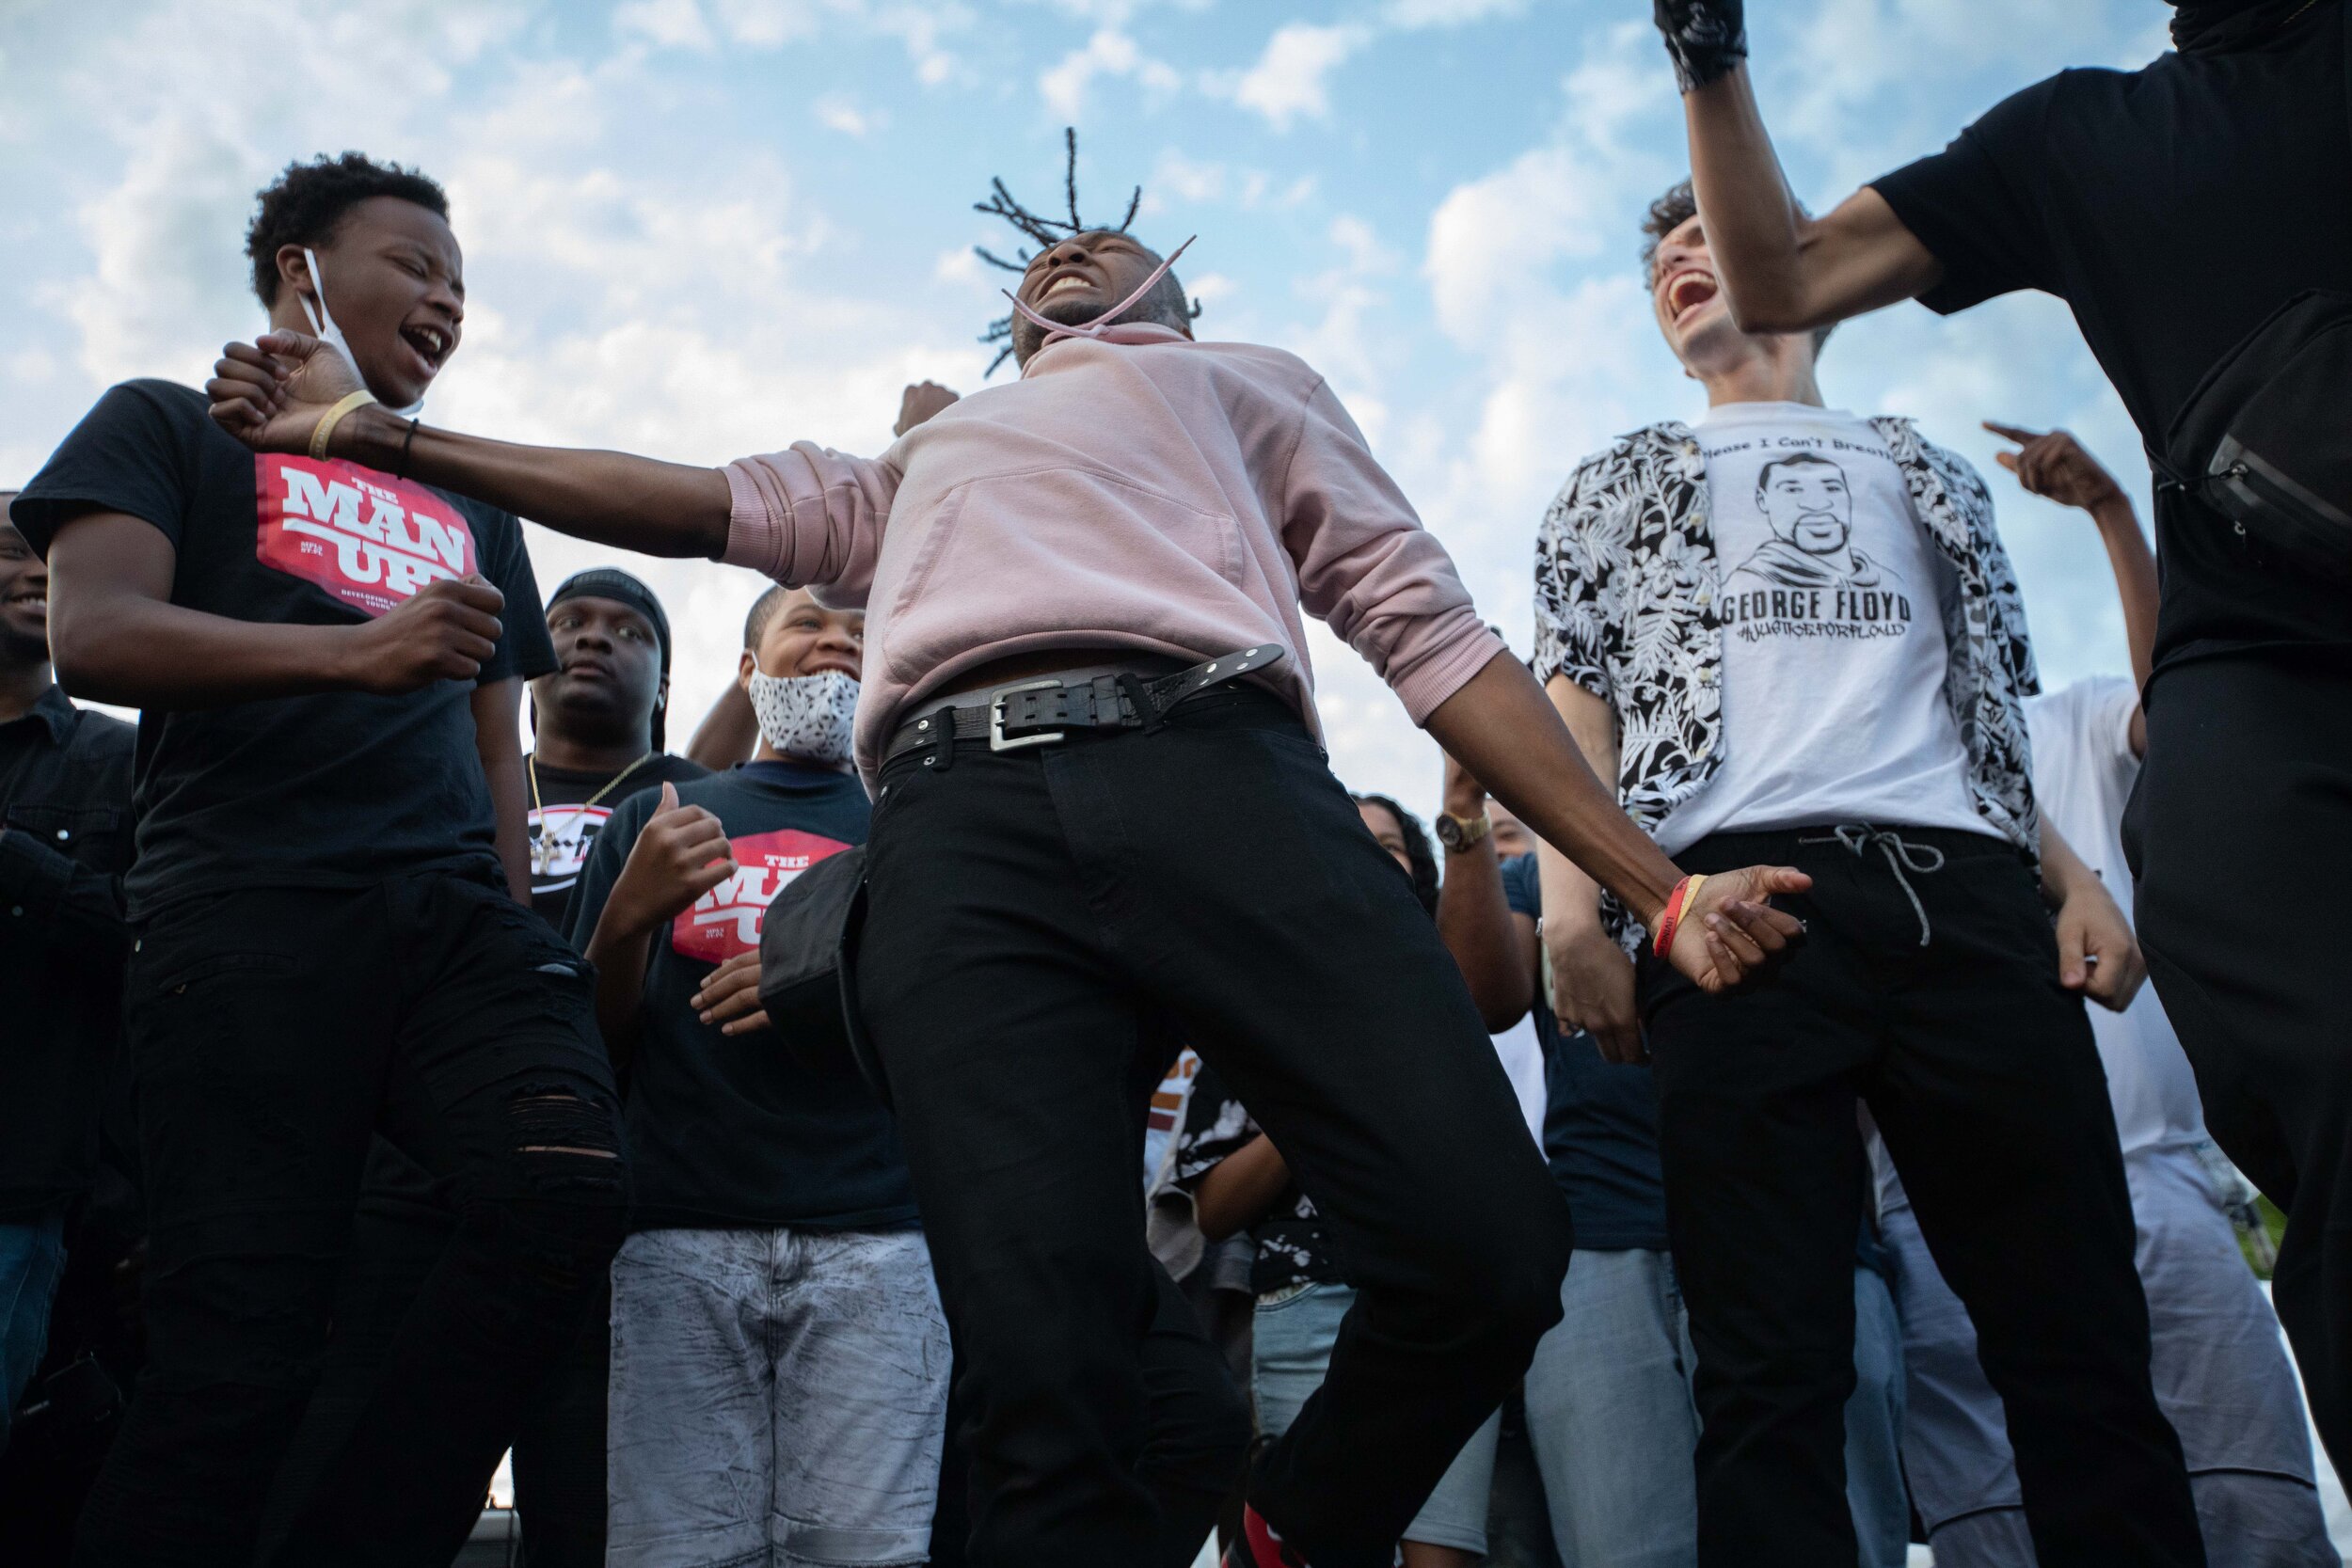  At the George Floyd memorial, a young man dances while the hip Christian hop artist Xross performs the song OMG. Xross founded the Man Up Club and lead a prayer at the memorial site in Minneapolis, Minnesota on Jun 14, 2020. 